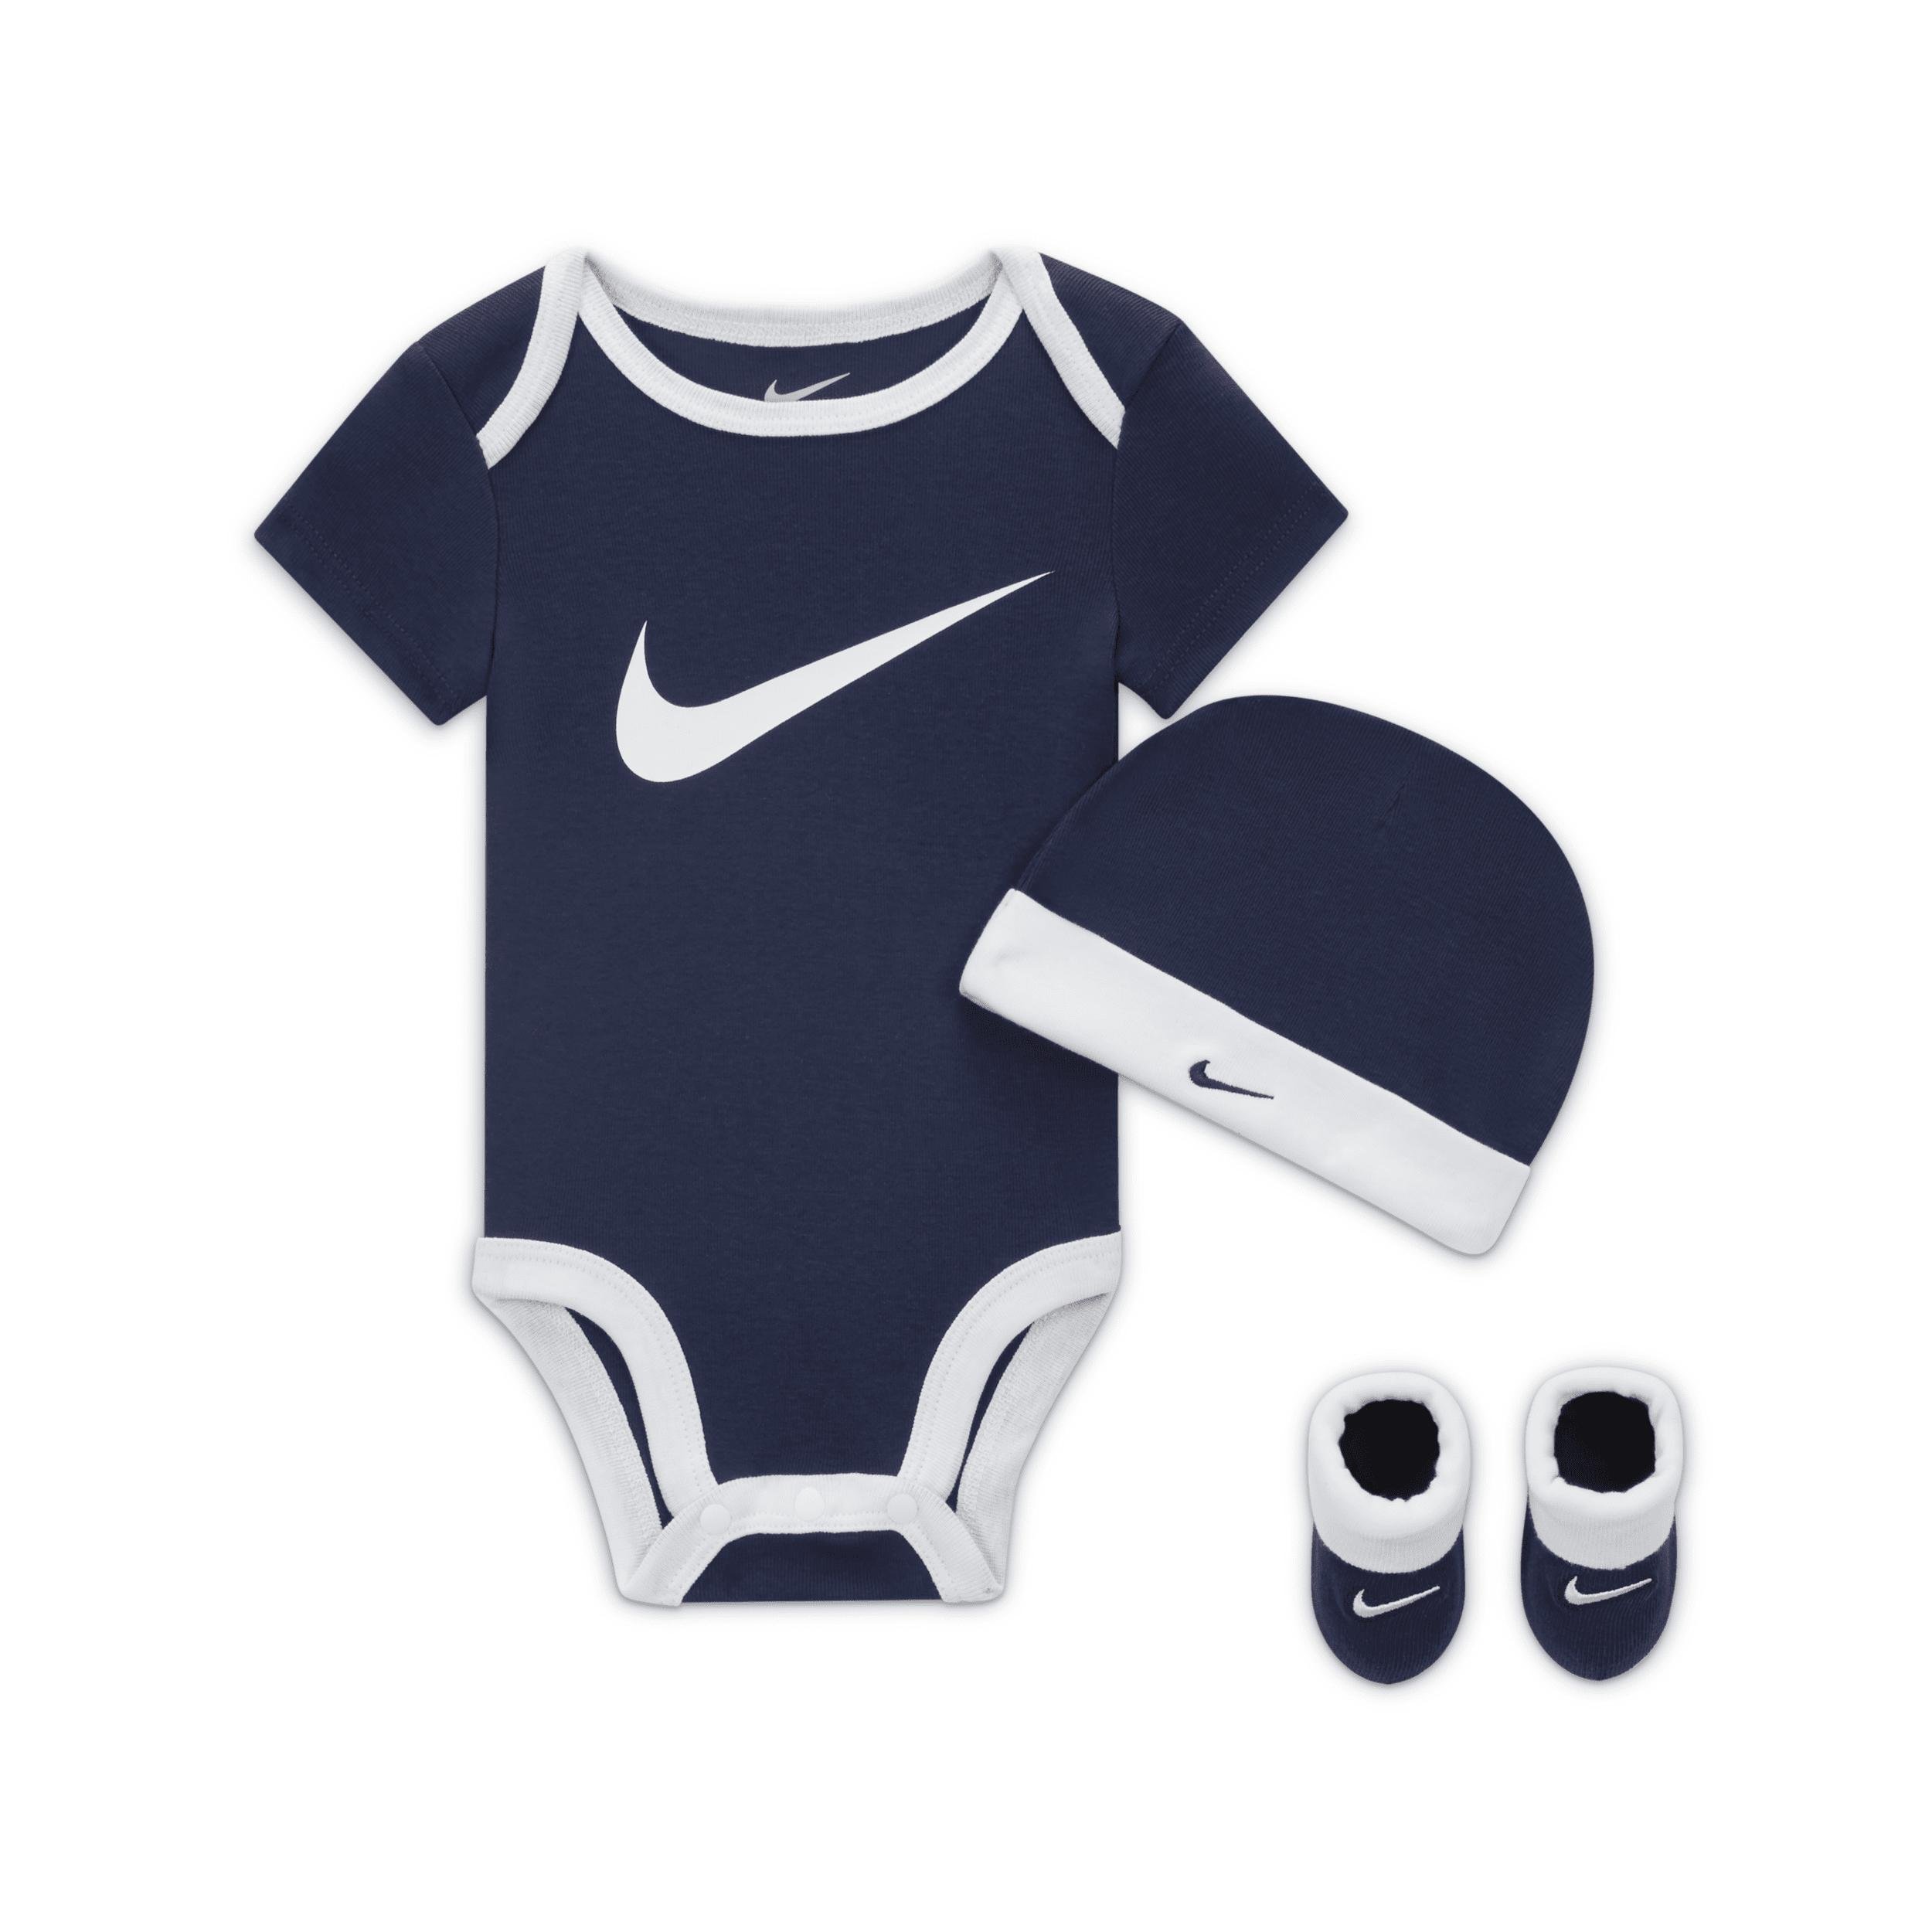 Nike Baby (6-12M) Bodysuit, Hat and Booties Box Set by NIKE